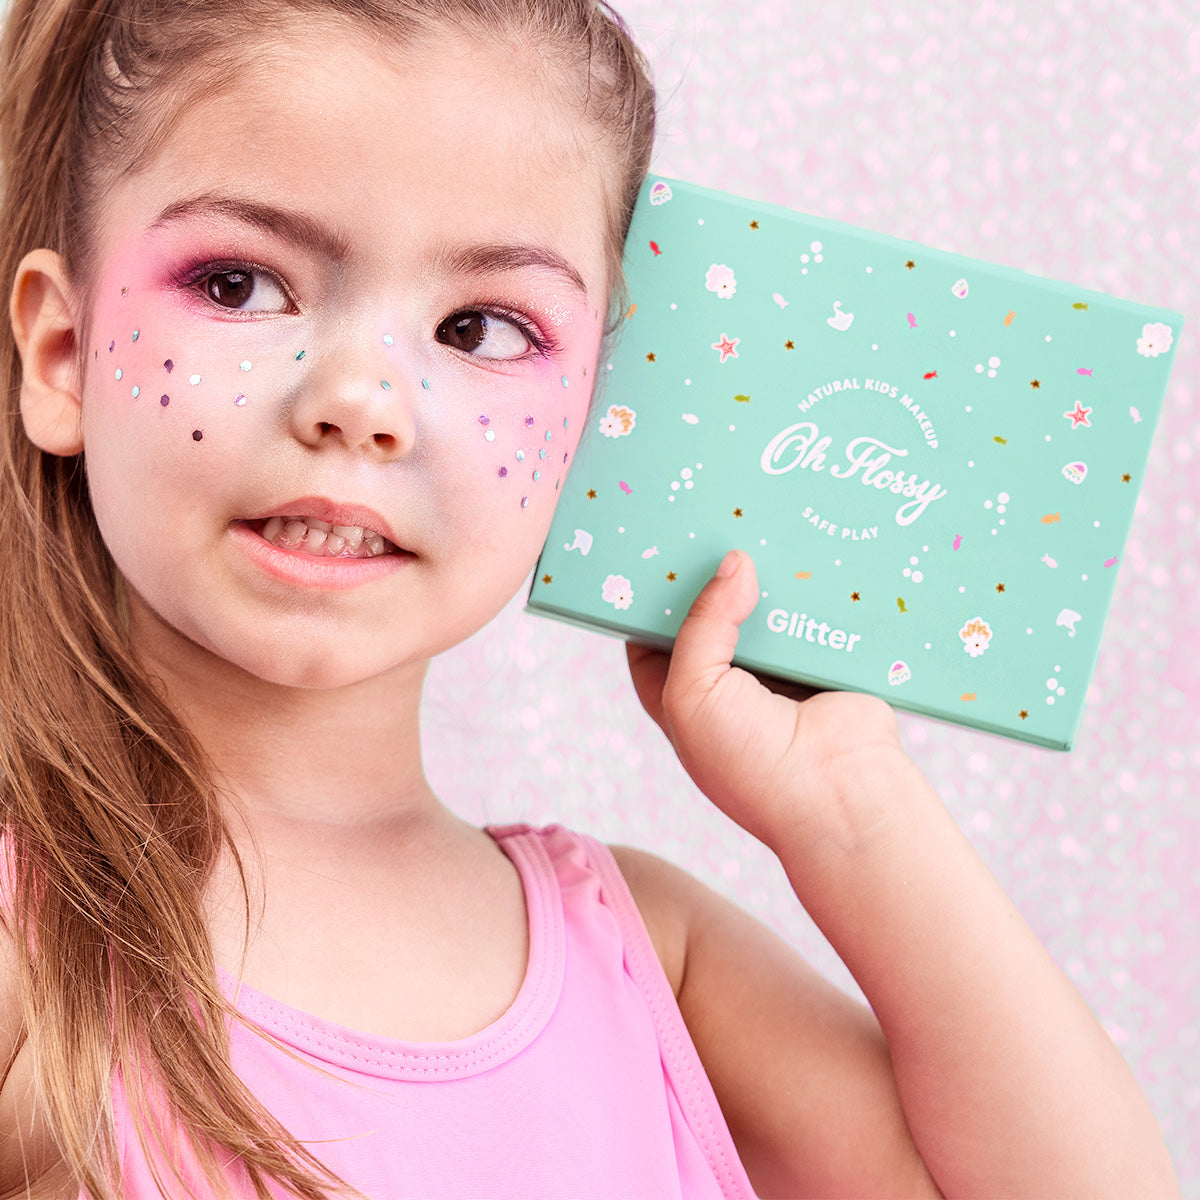 Oh Flossy Kids Under the Sea Glitter Set